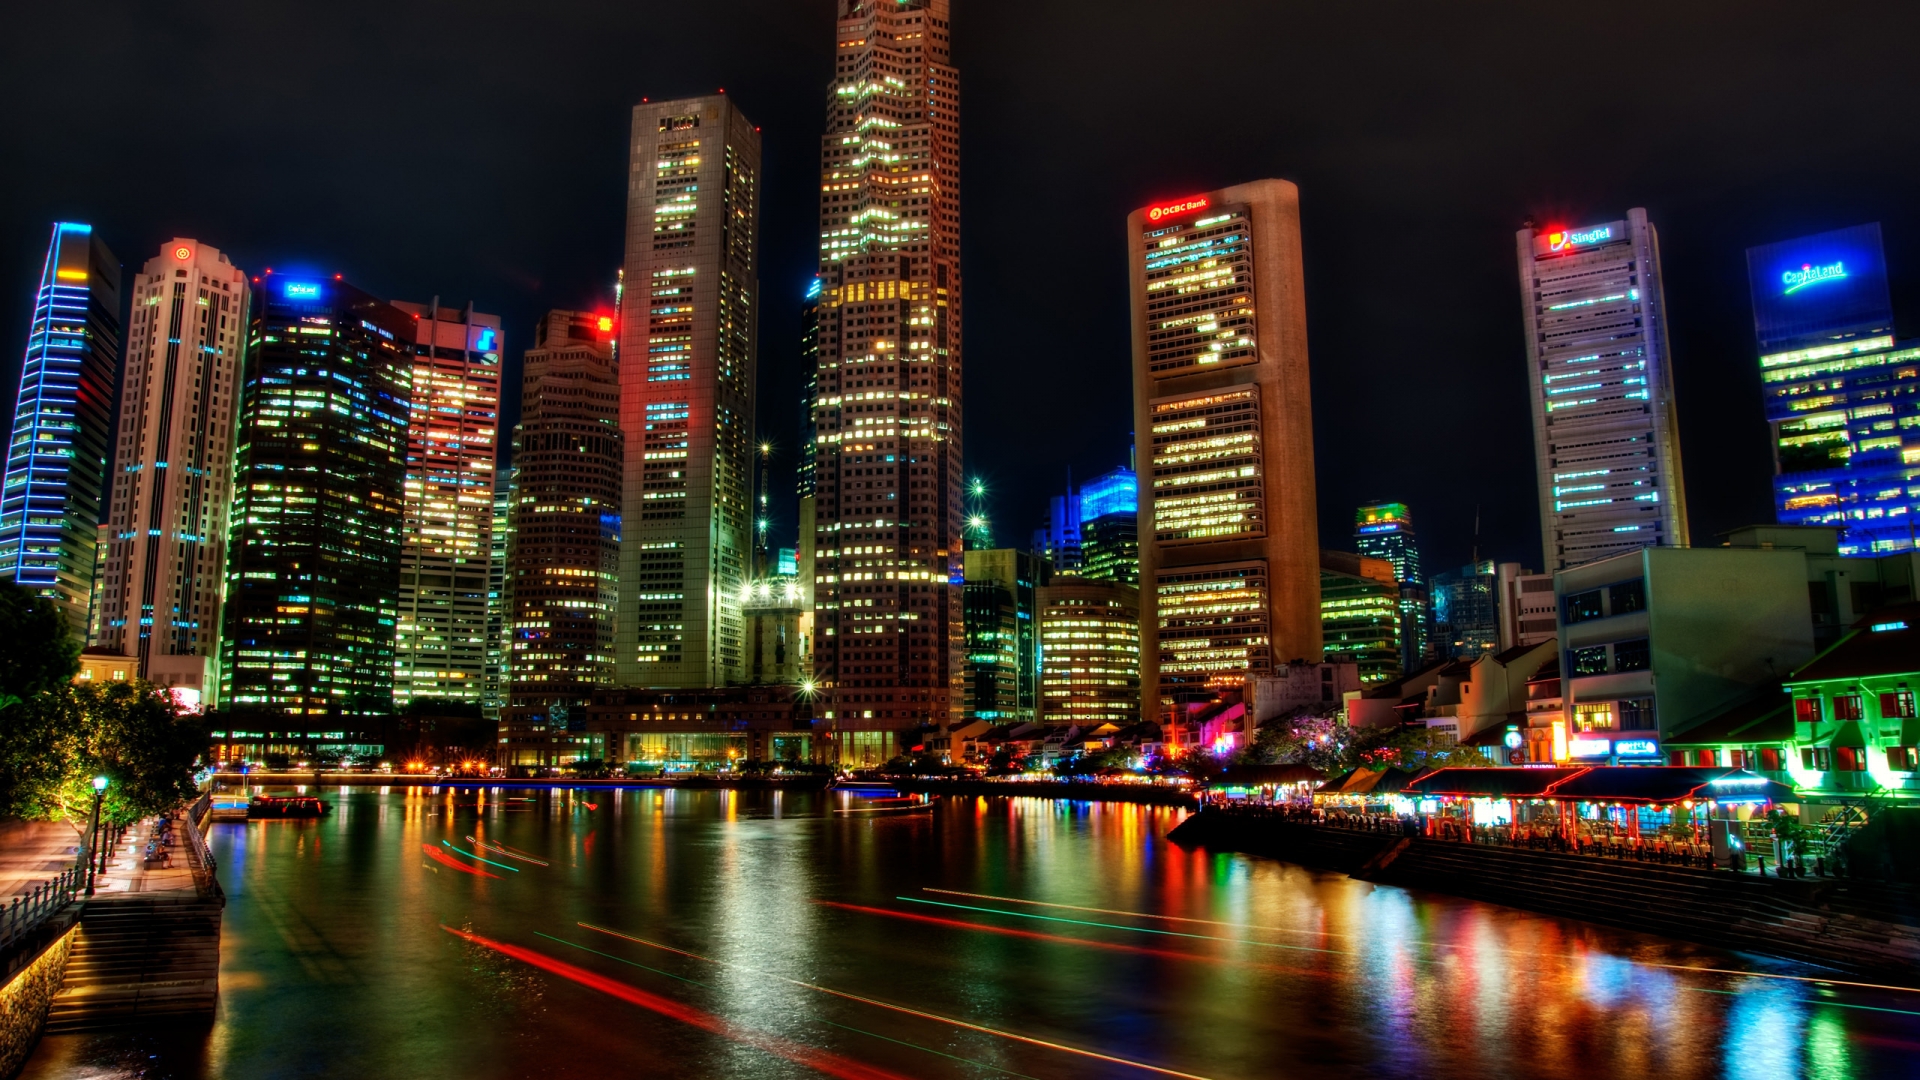 Singapore Night View for 1920 x 1080 HDTV 1080p resolution